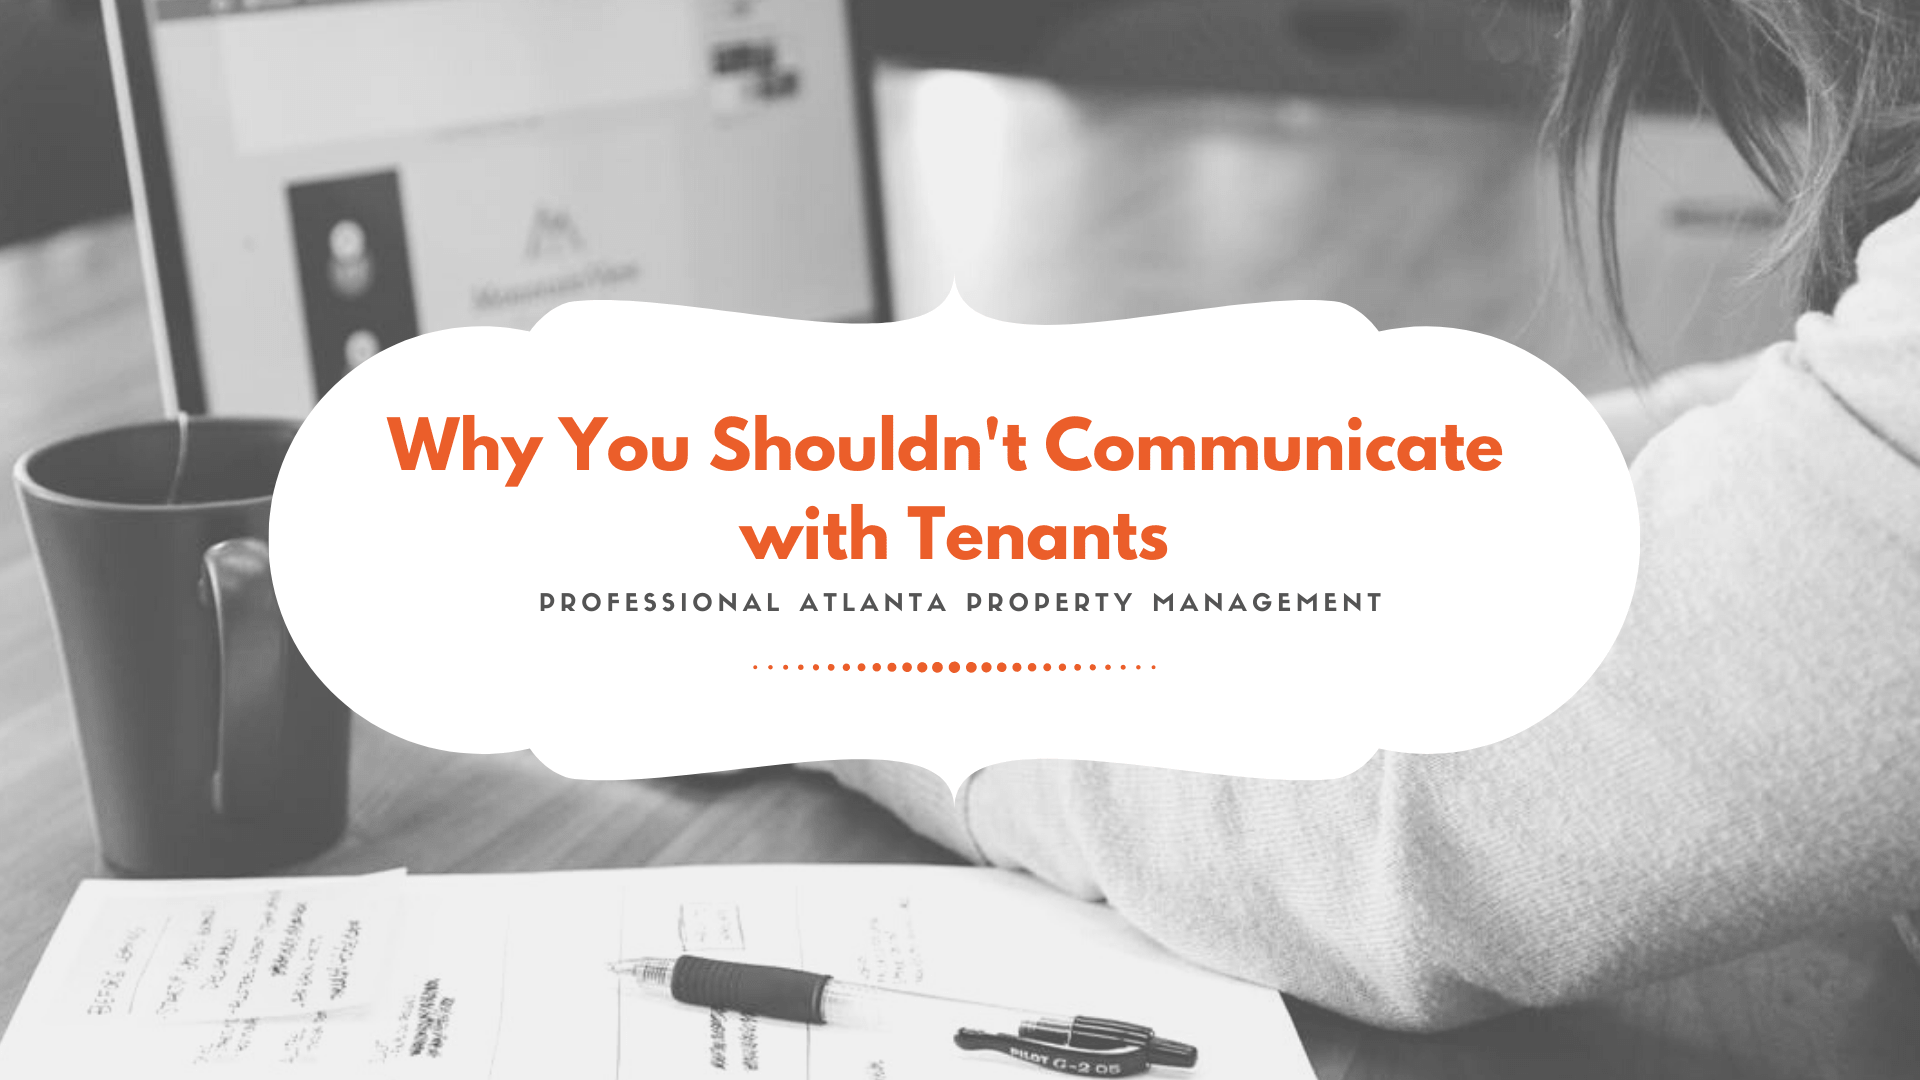 Why as a Homeowner Should I NOT be Communicating with the Tenant if I Have a Management Company?